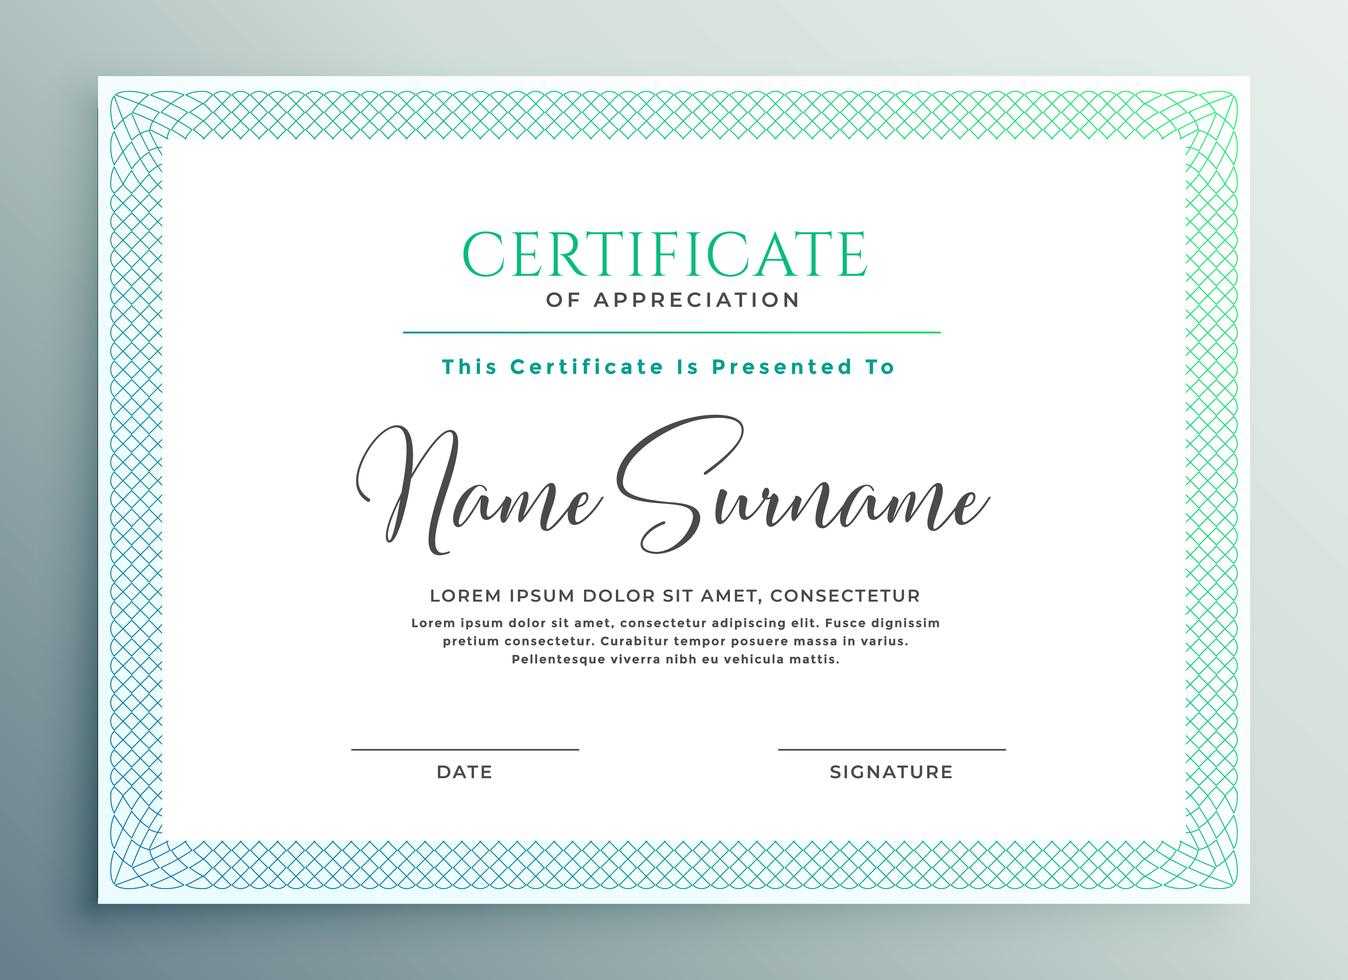 30+ Certificate Of Appreciation Download!! | Templates Study Throughout Certificate Of Appreciation Template Free Printable